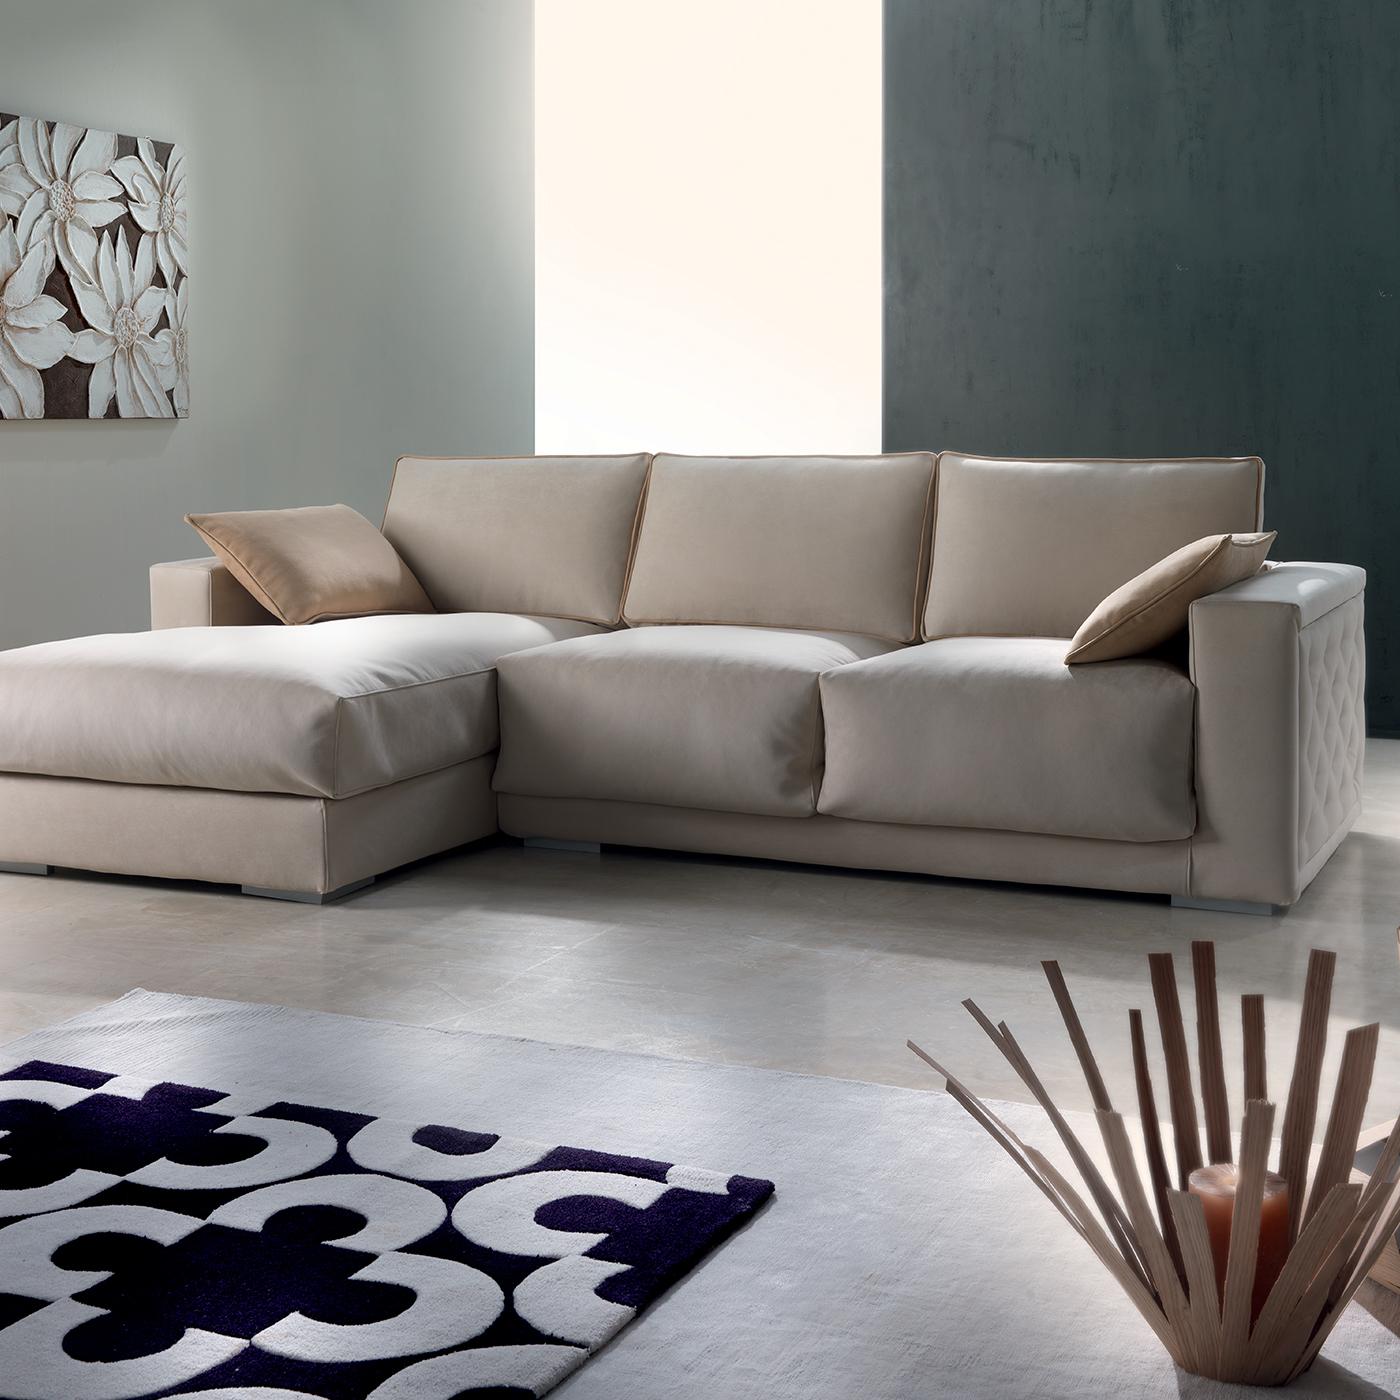 Providing ample and comfortable seating in a modern living room, this sofa with chaise lounge is a sophisticated piece that will suit a variety of decors, thanks to its neutral fabric upholstery and exquisite craftsmanship. The plush seat cushions